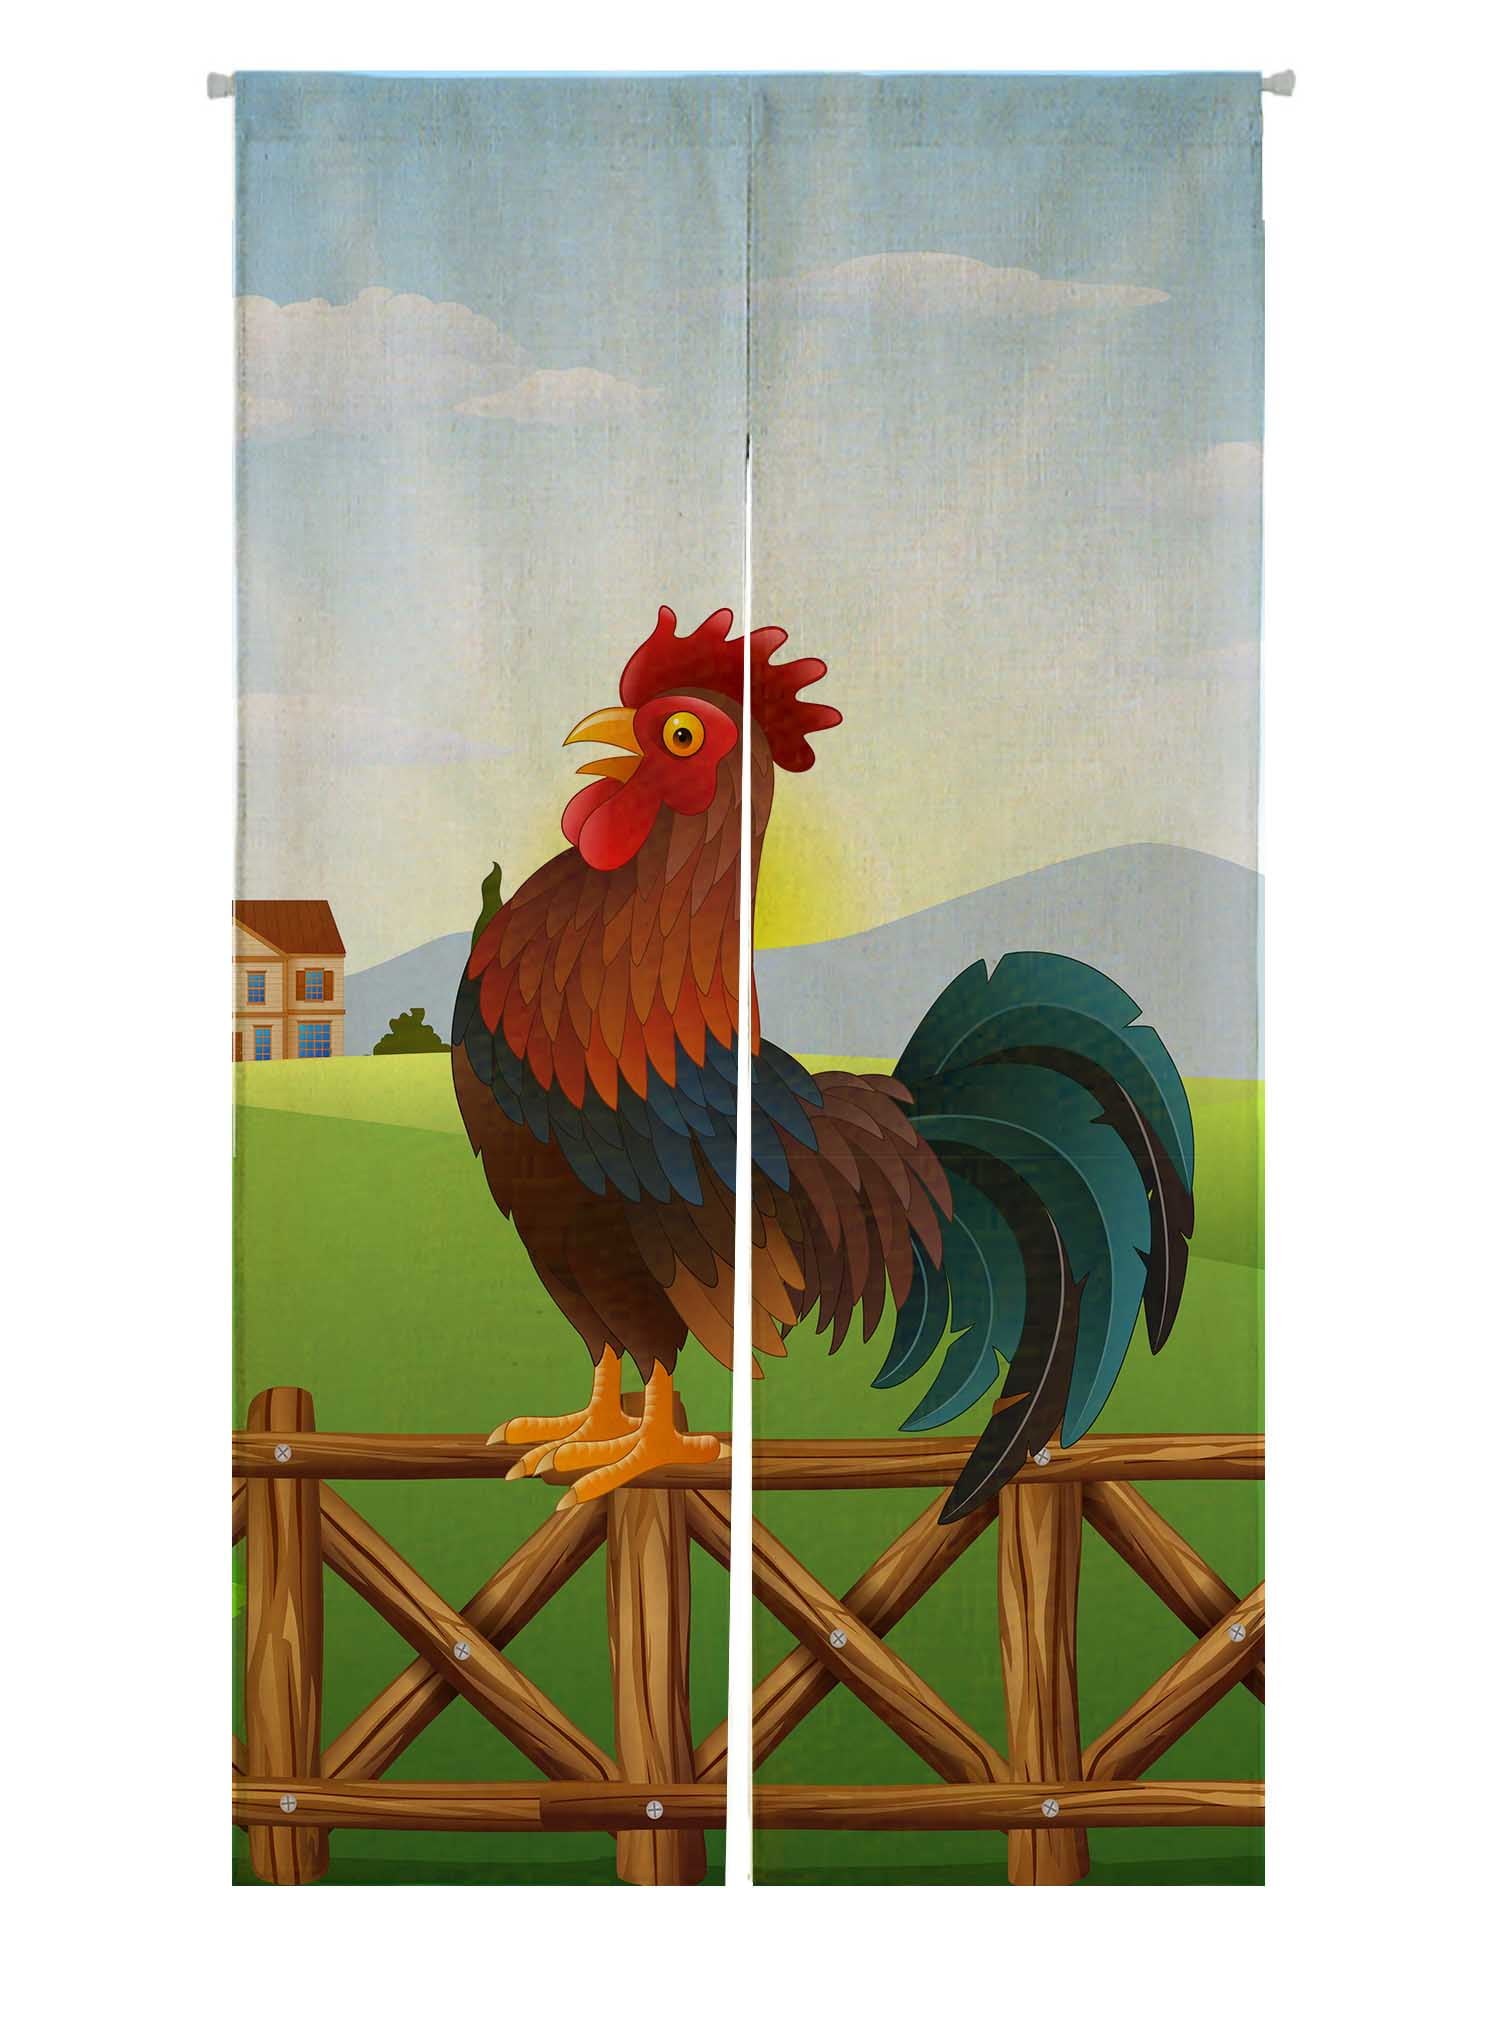 PKQWTM Cartoon Rooster Crowing At Farm Field Morning Sun Rising Door  Curtain Window Cover Home Decor Hanging Curtain Size 85x150 CM 